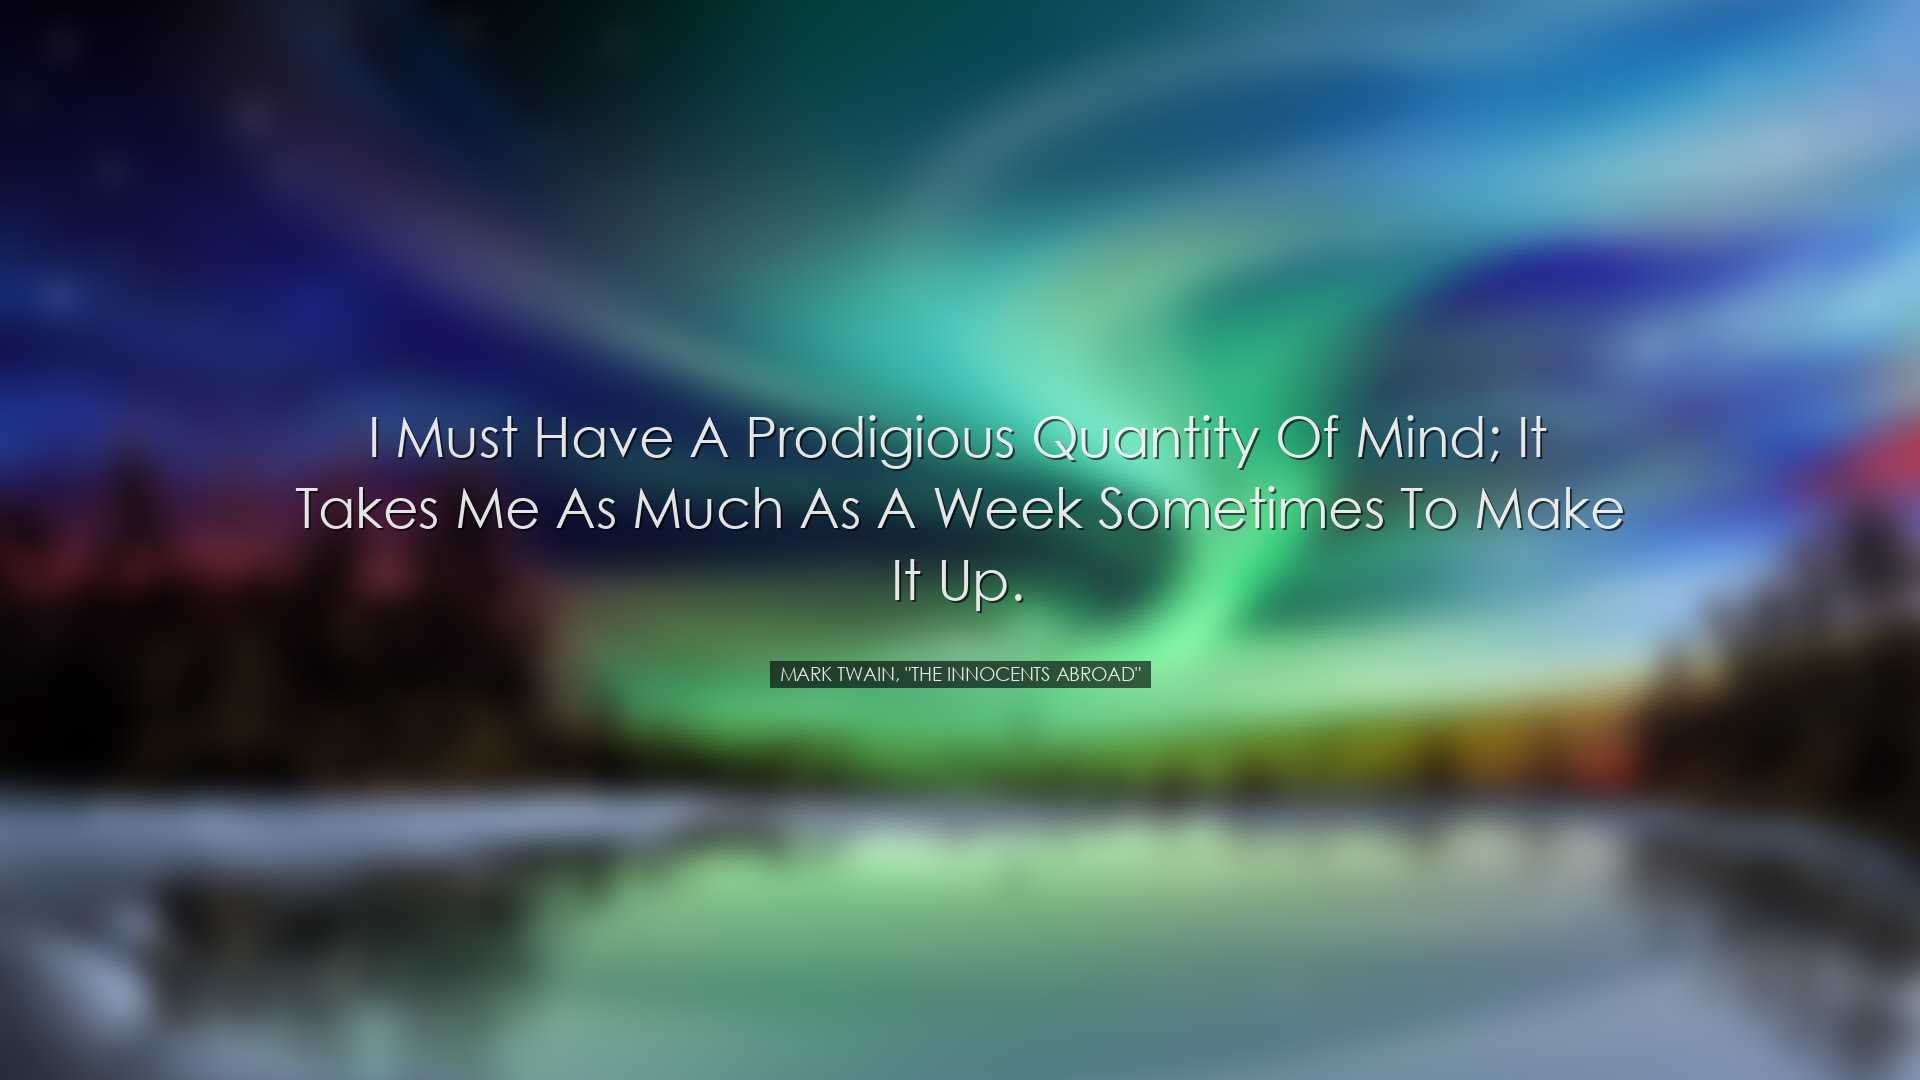 I must have a prodigious quantity of mind; it takes me as much as